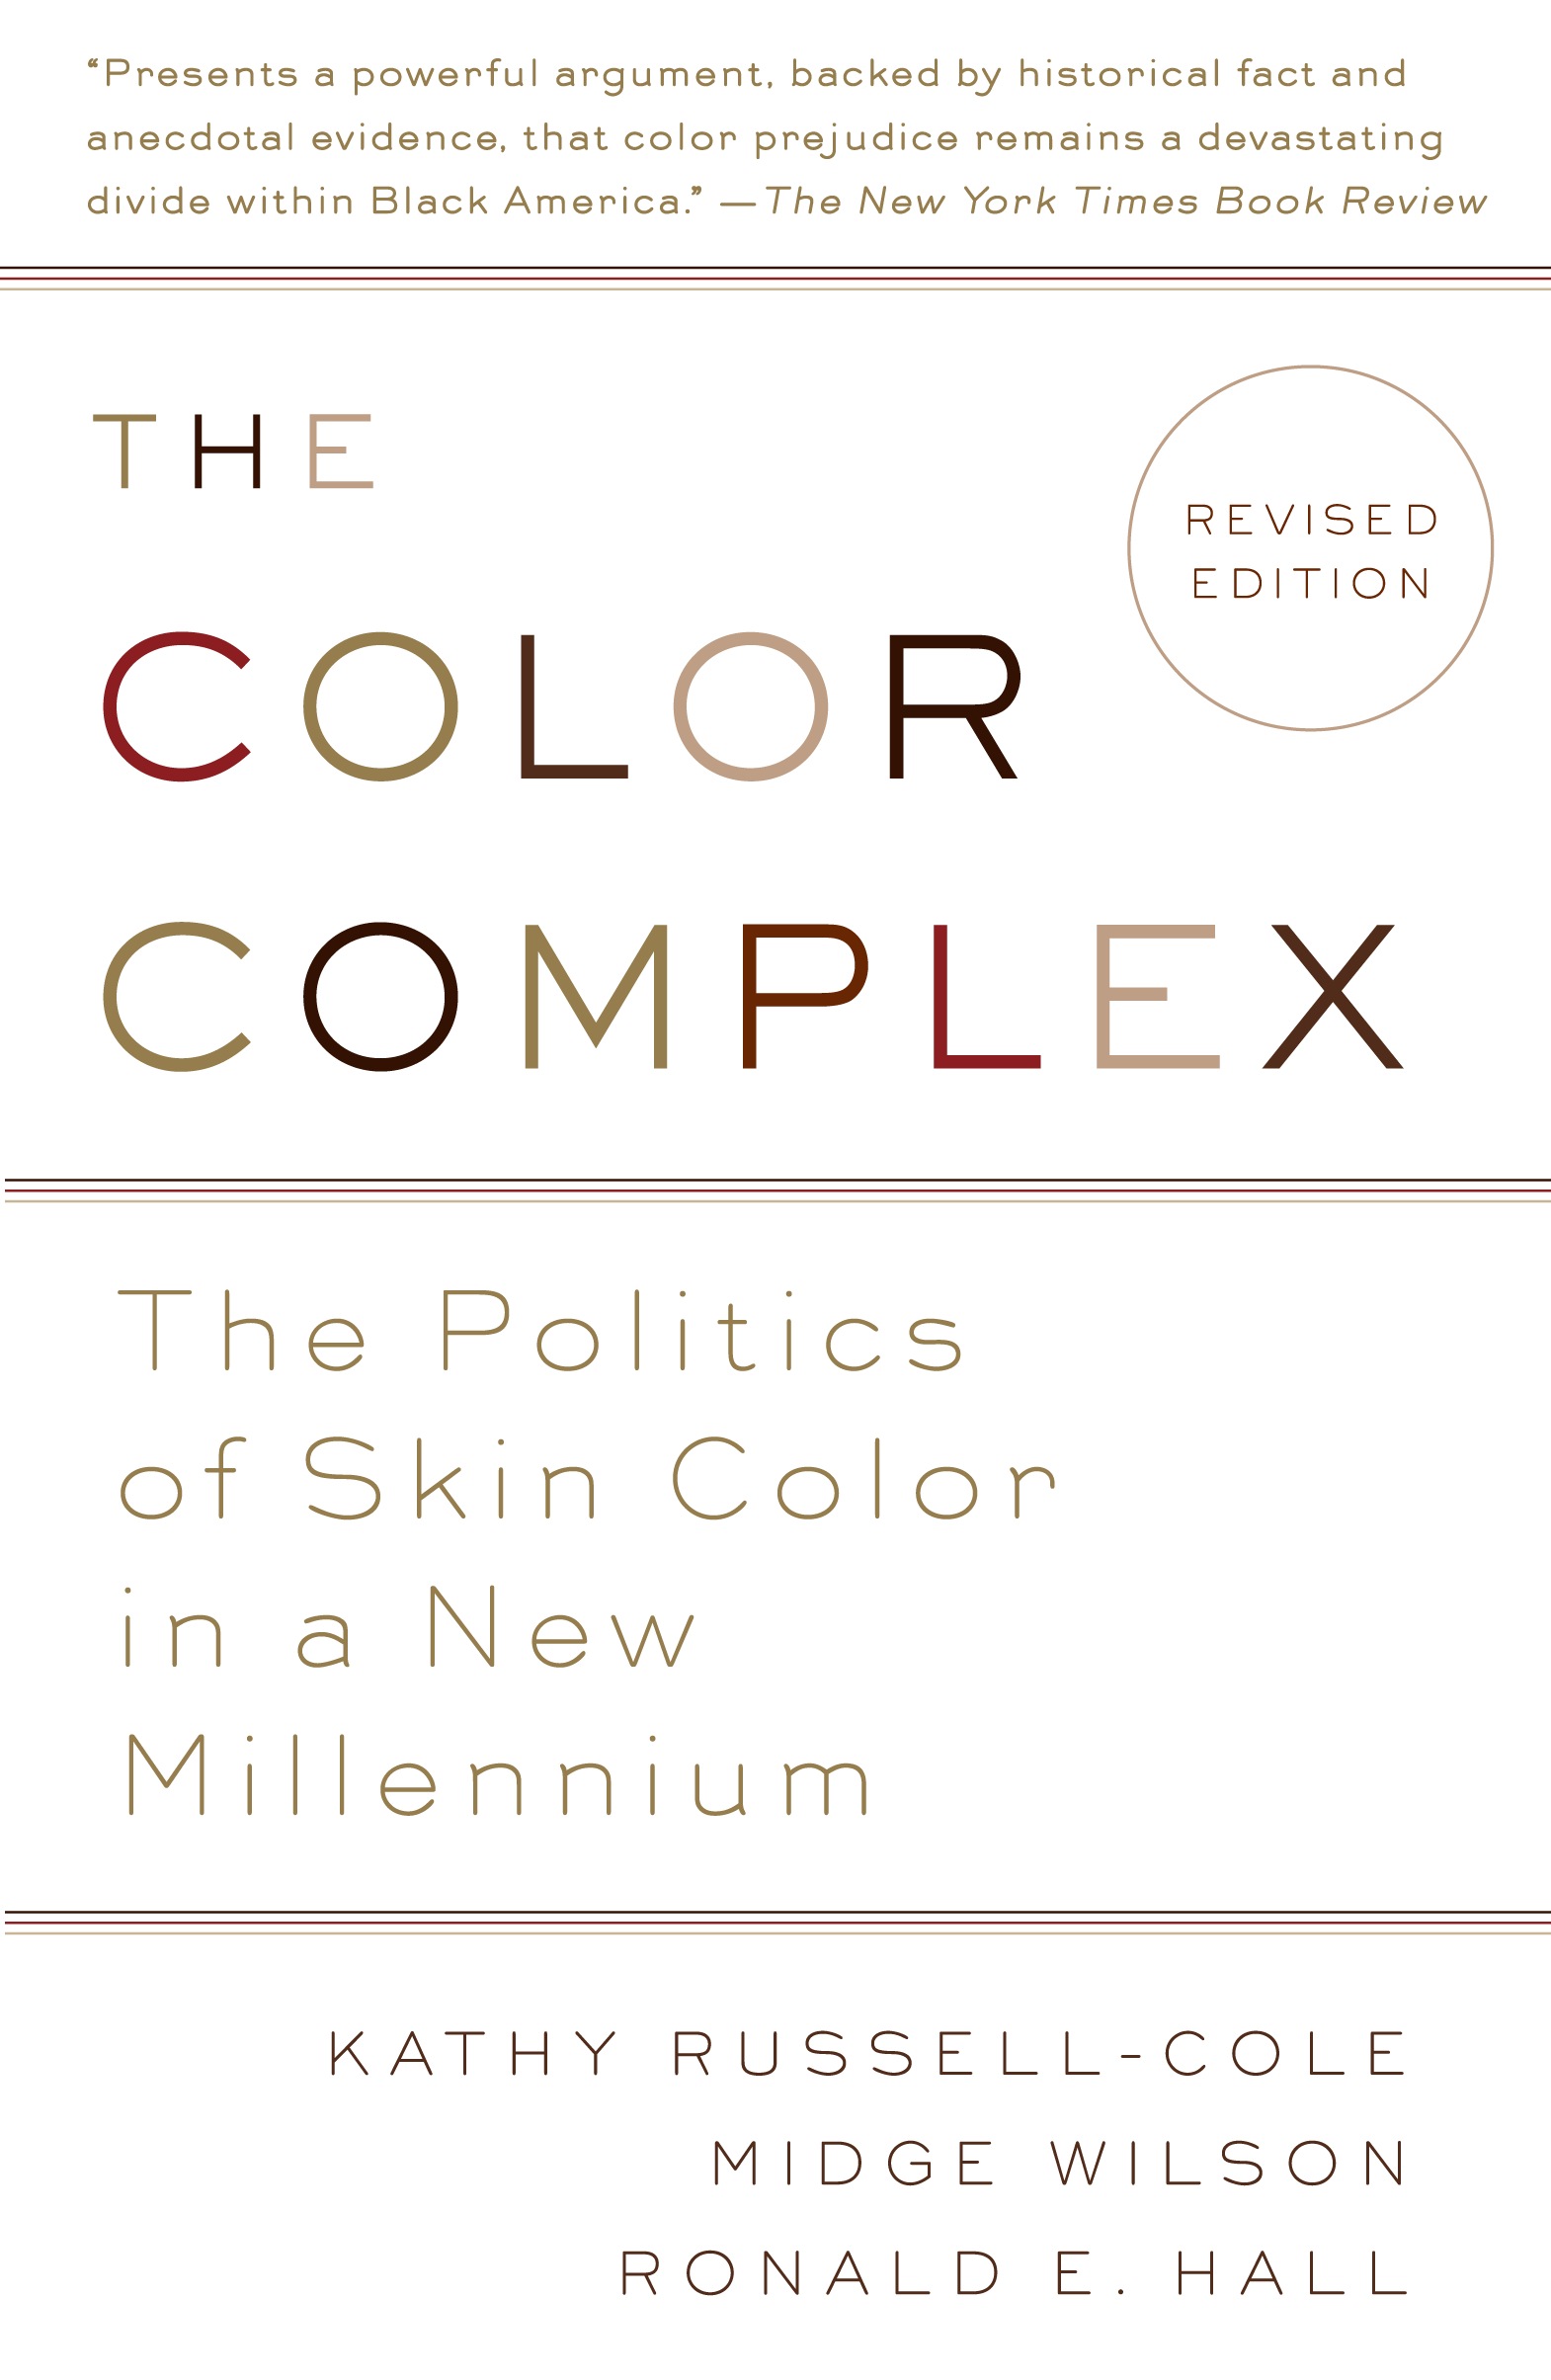 NDG Bookshelf: The Color Complex offers an uncomfortable look at colorism